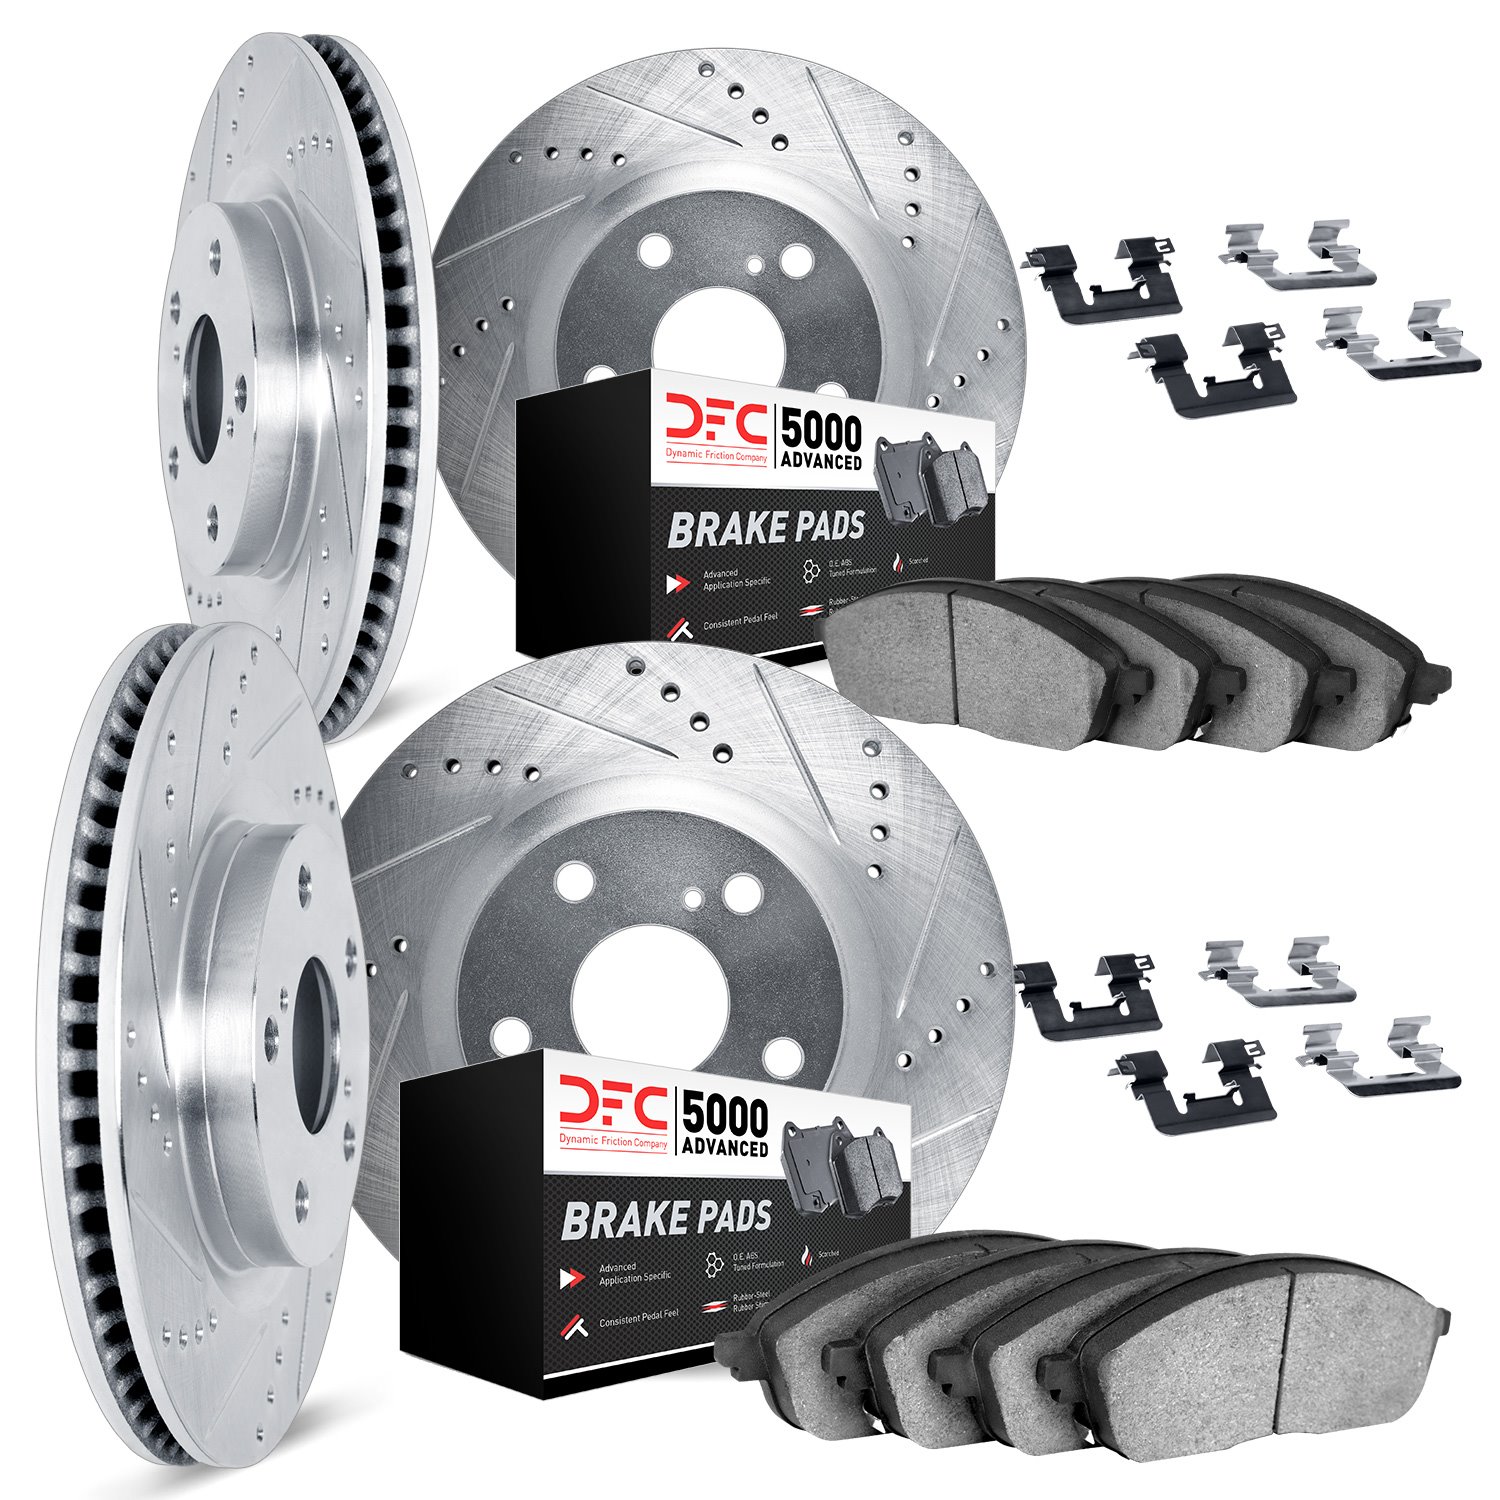 7514-11019 Drilled/Slotted Brake Rotors w/5000 Advanced Brake Pads Kit & Hardware [Silver], 2014-2017 Land Rover, Position: Fron